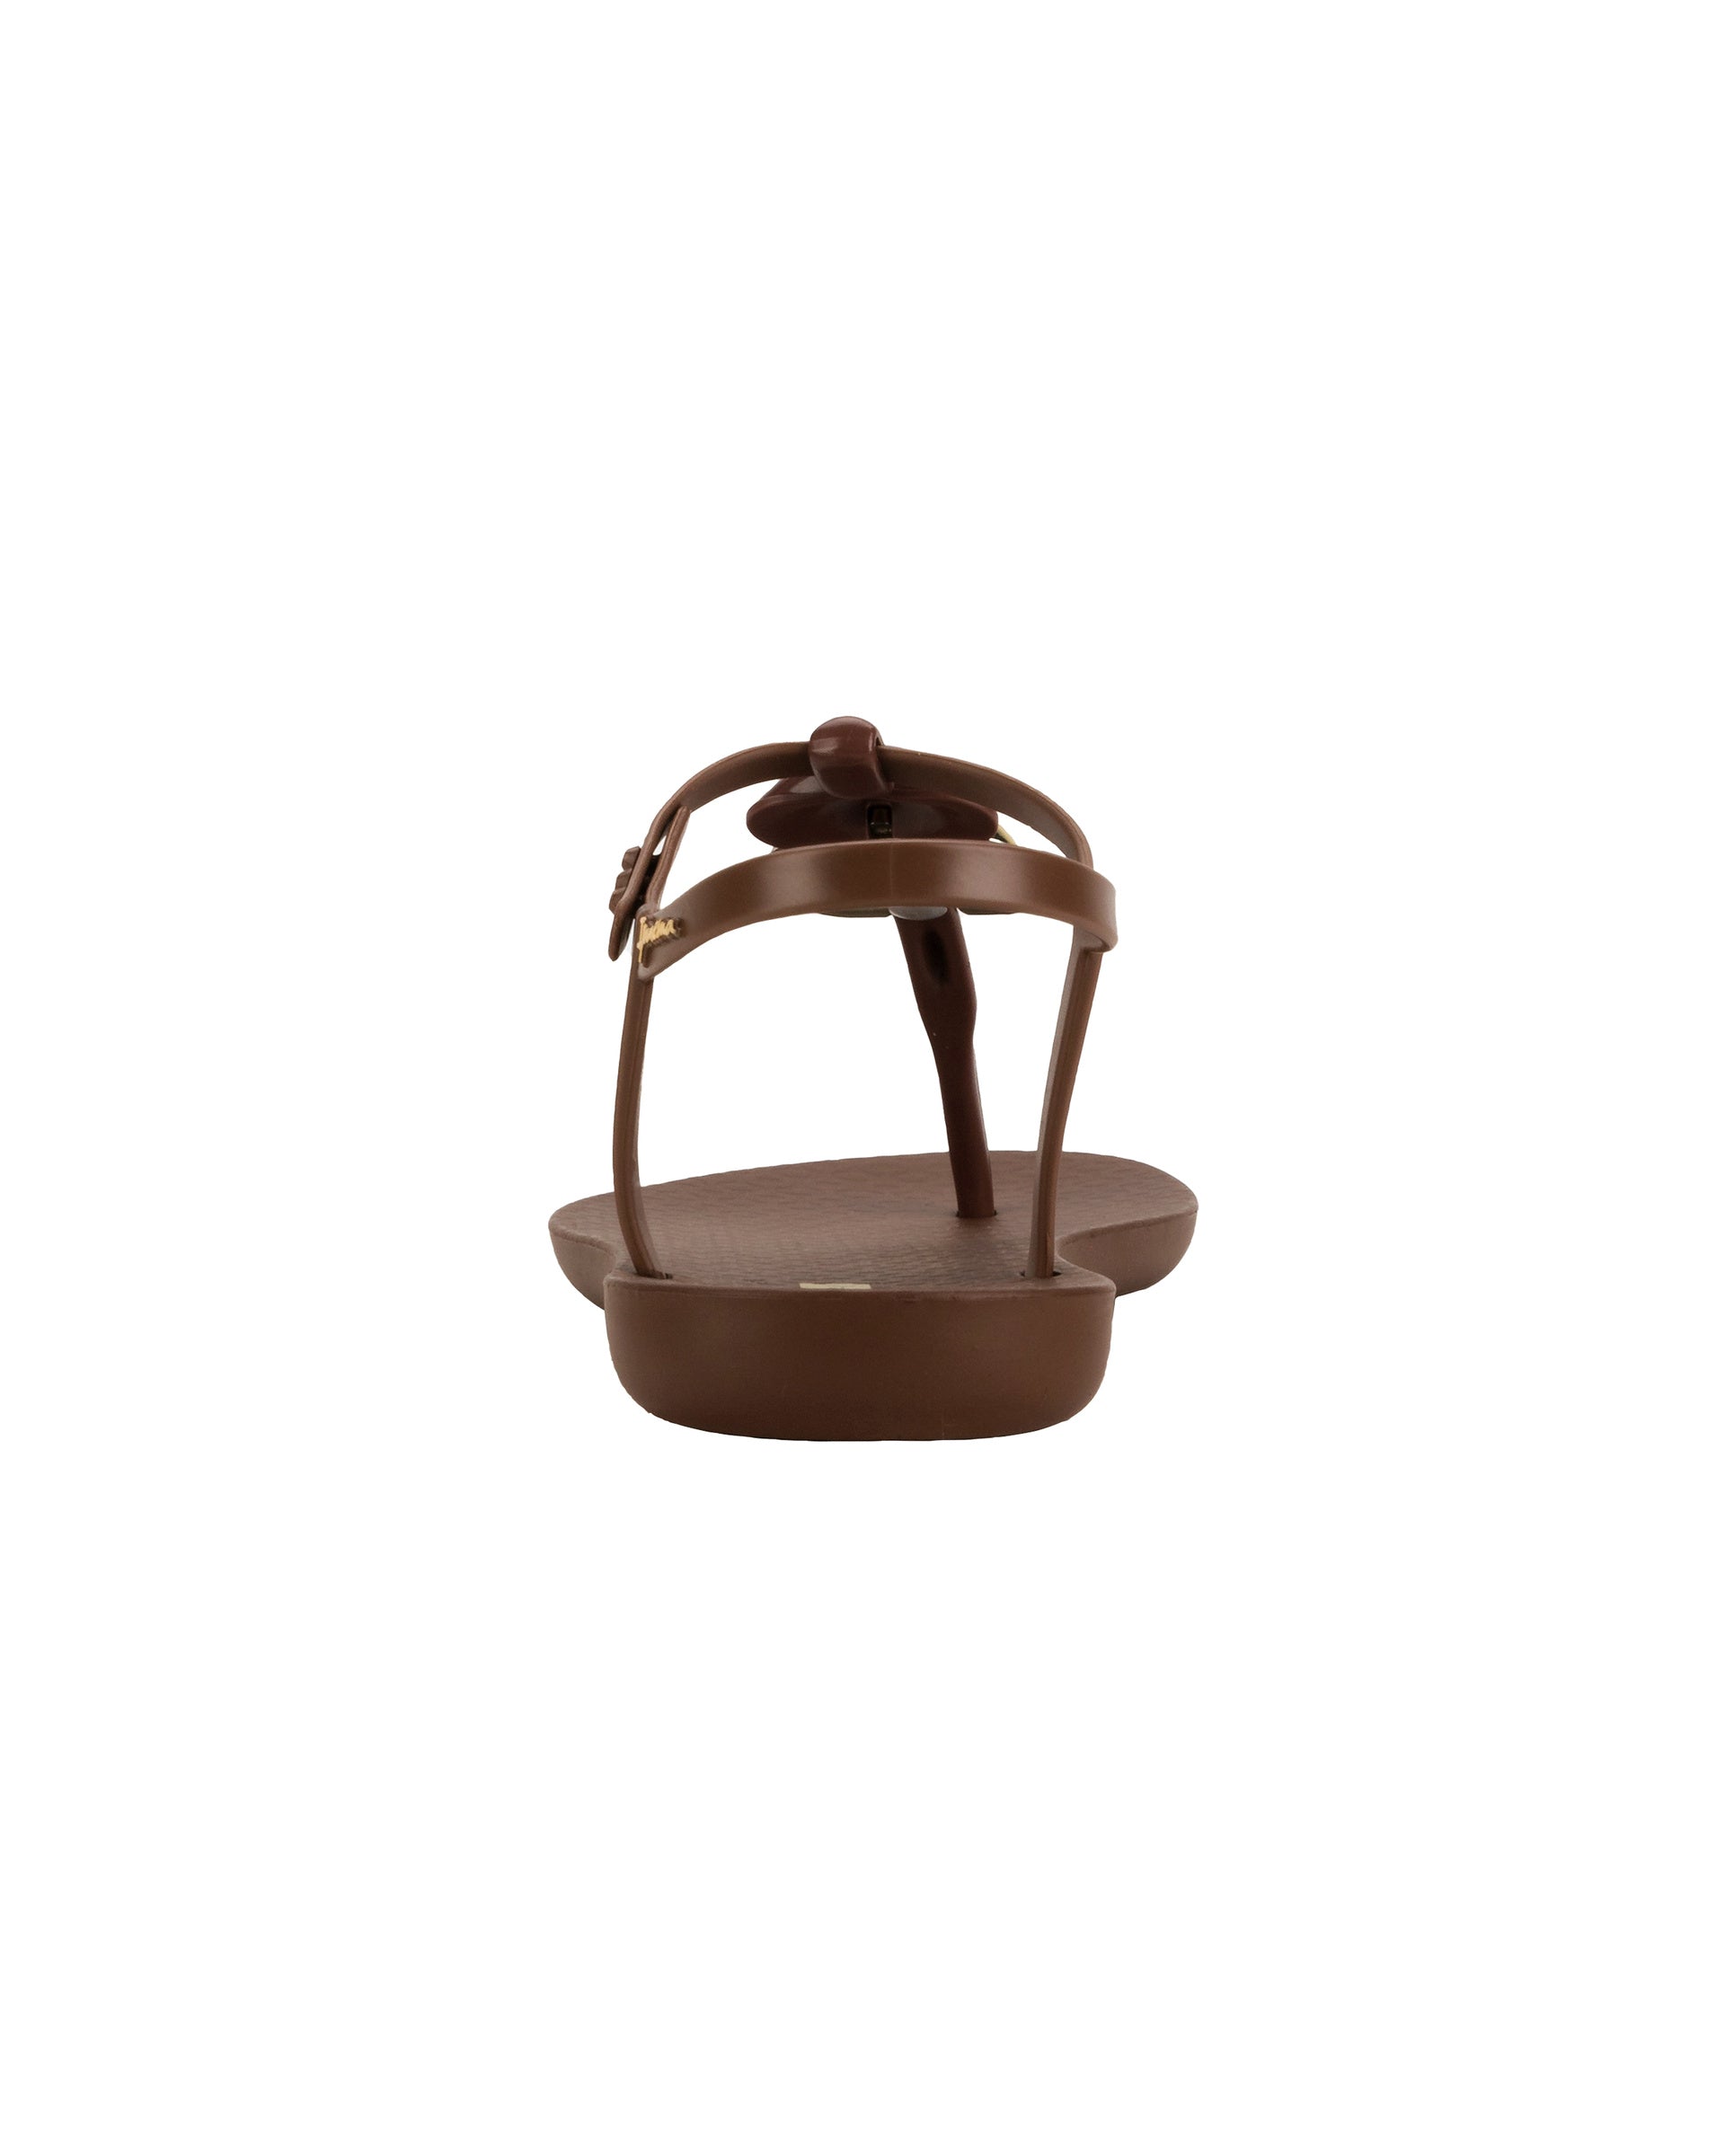 Back view of a brown Ipanema Class women's sandal with 3 bubble baubles on the t-strap.